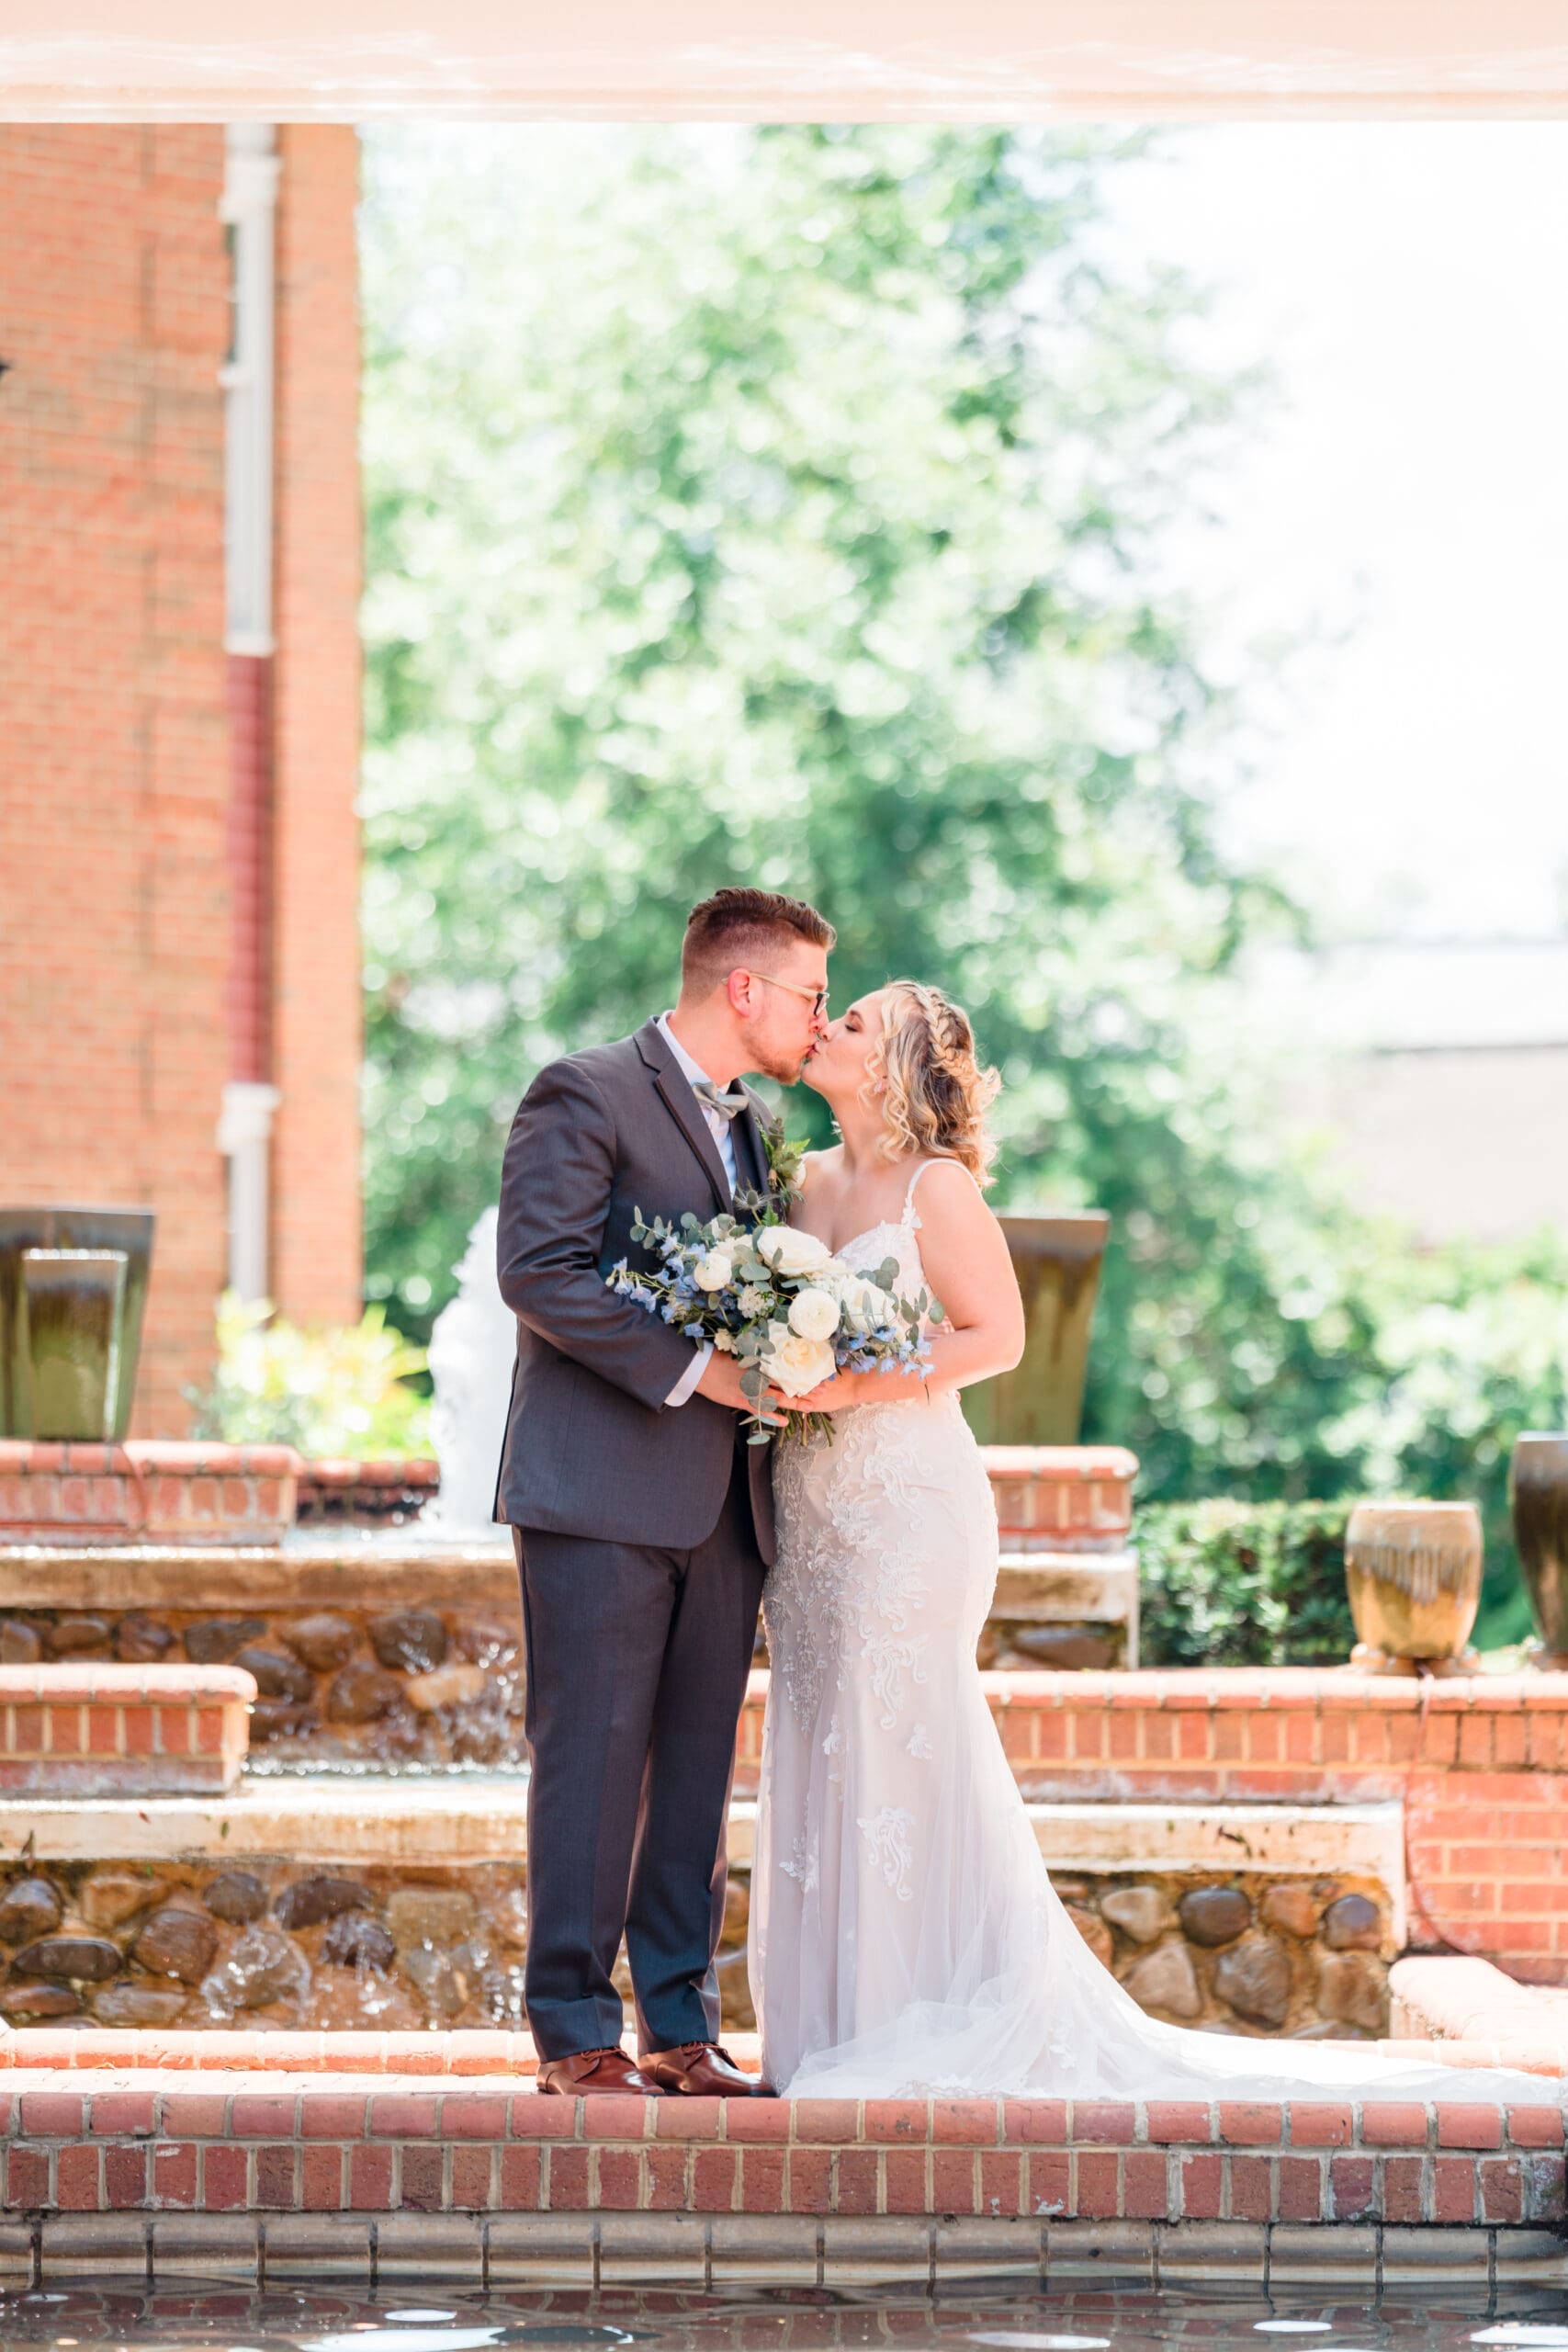 Captivating moment captured by Jerzy Nieves Photography, as the groom dips the bride for a romantic kiss in a picturesque brick courtyard, radiating timeless love and elegance